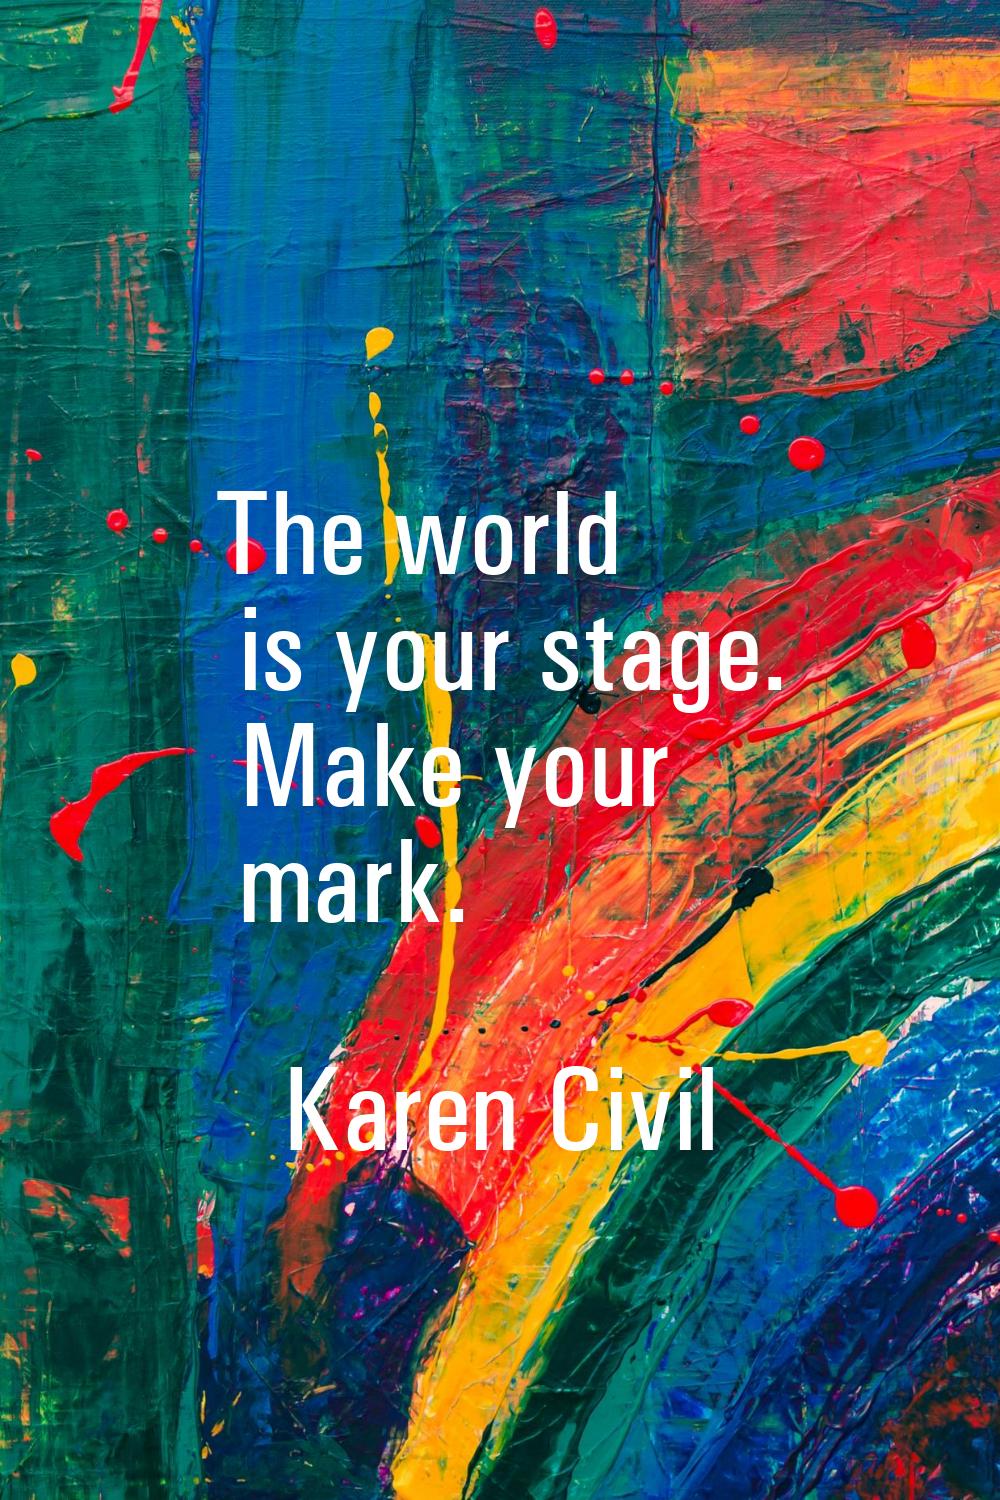 The world is your stage. Make your mark.